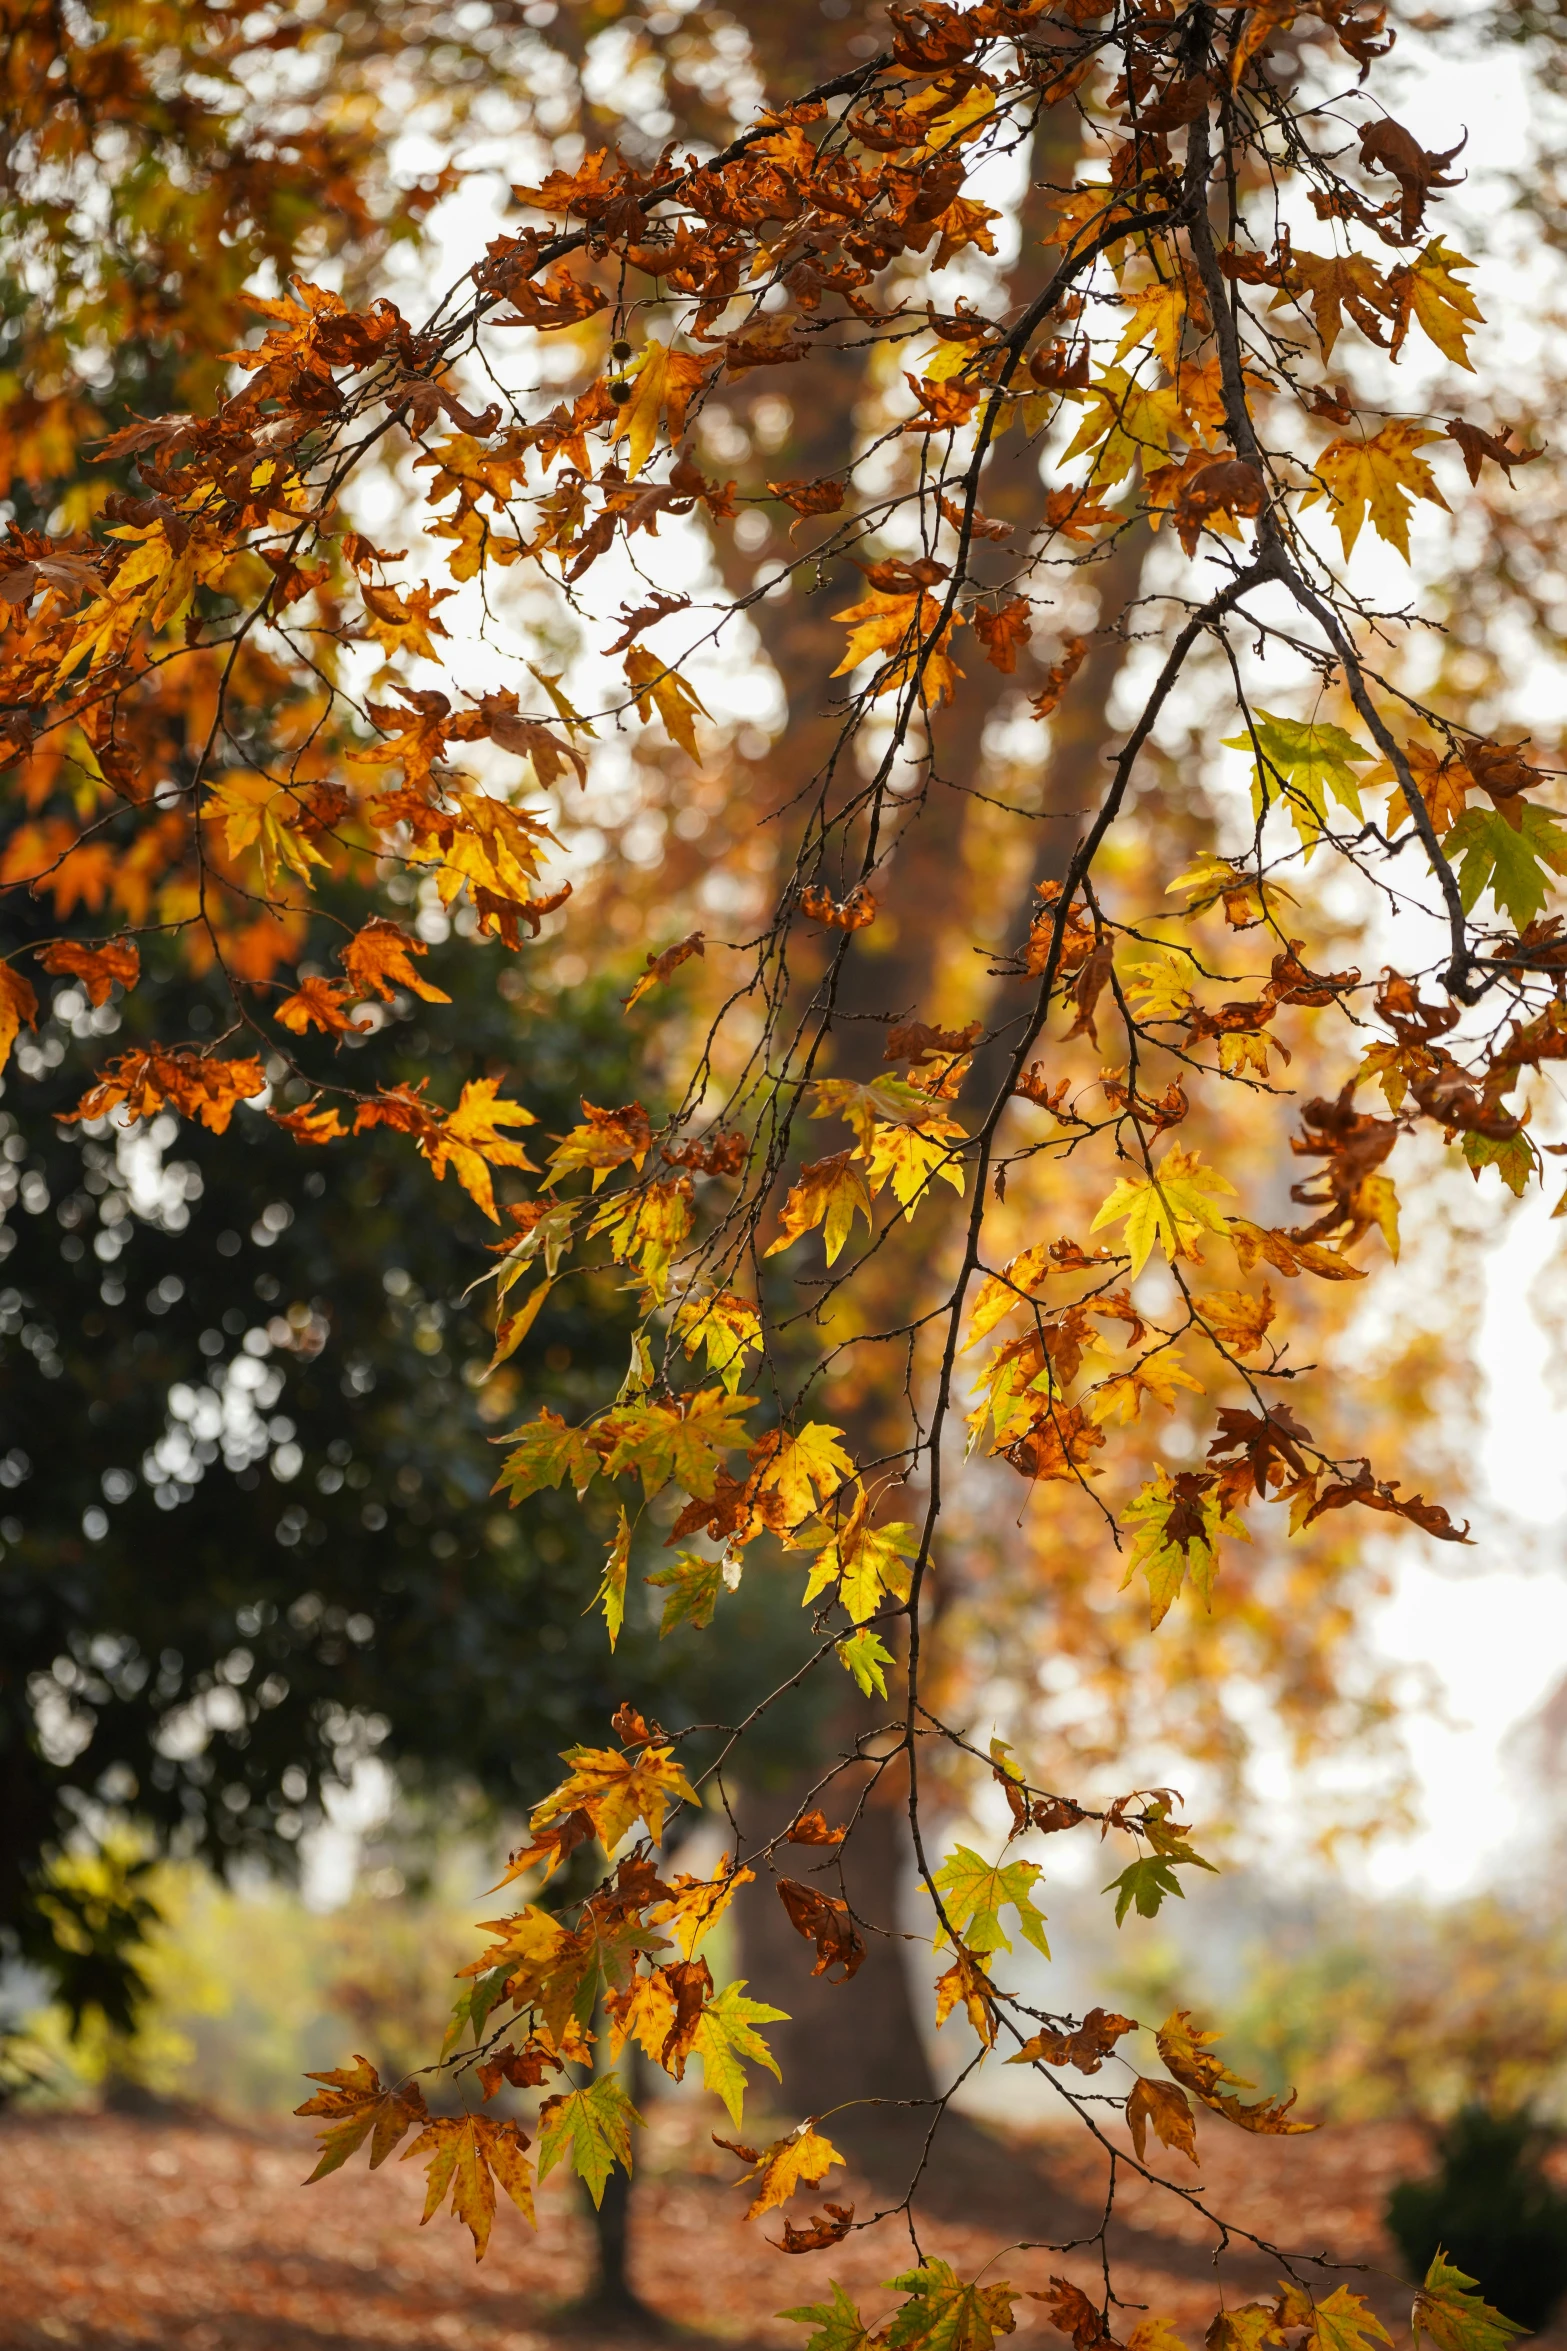 the nches of a tree with yellow and orange leaves